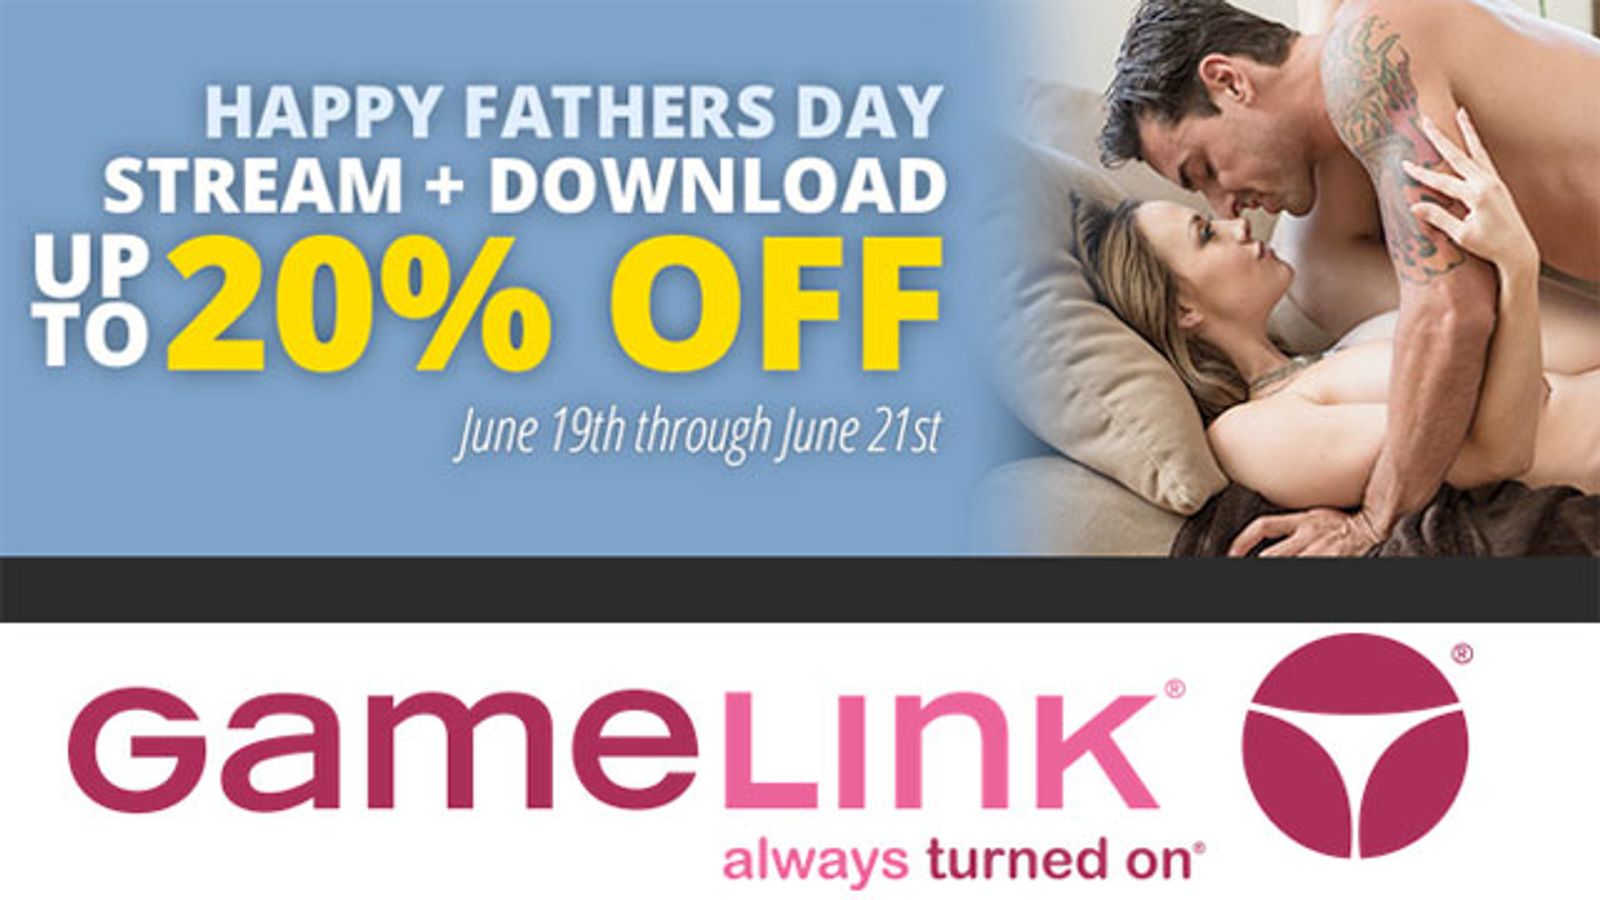 GameLink Celebrates Father’s Day with 20% Off on Streaming, Downloads